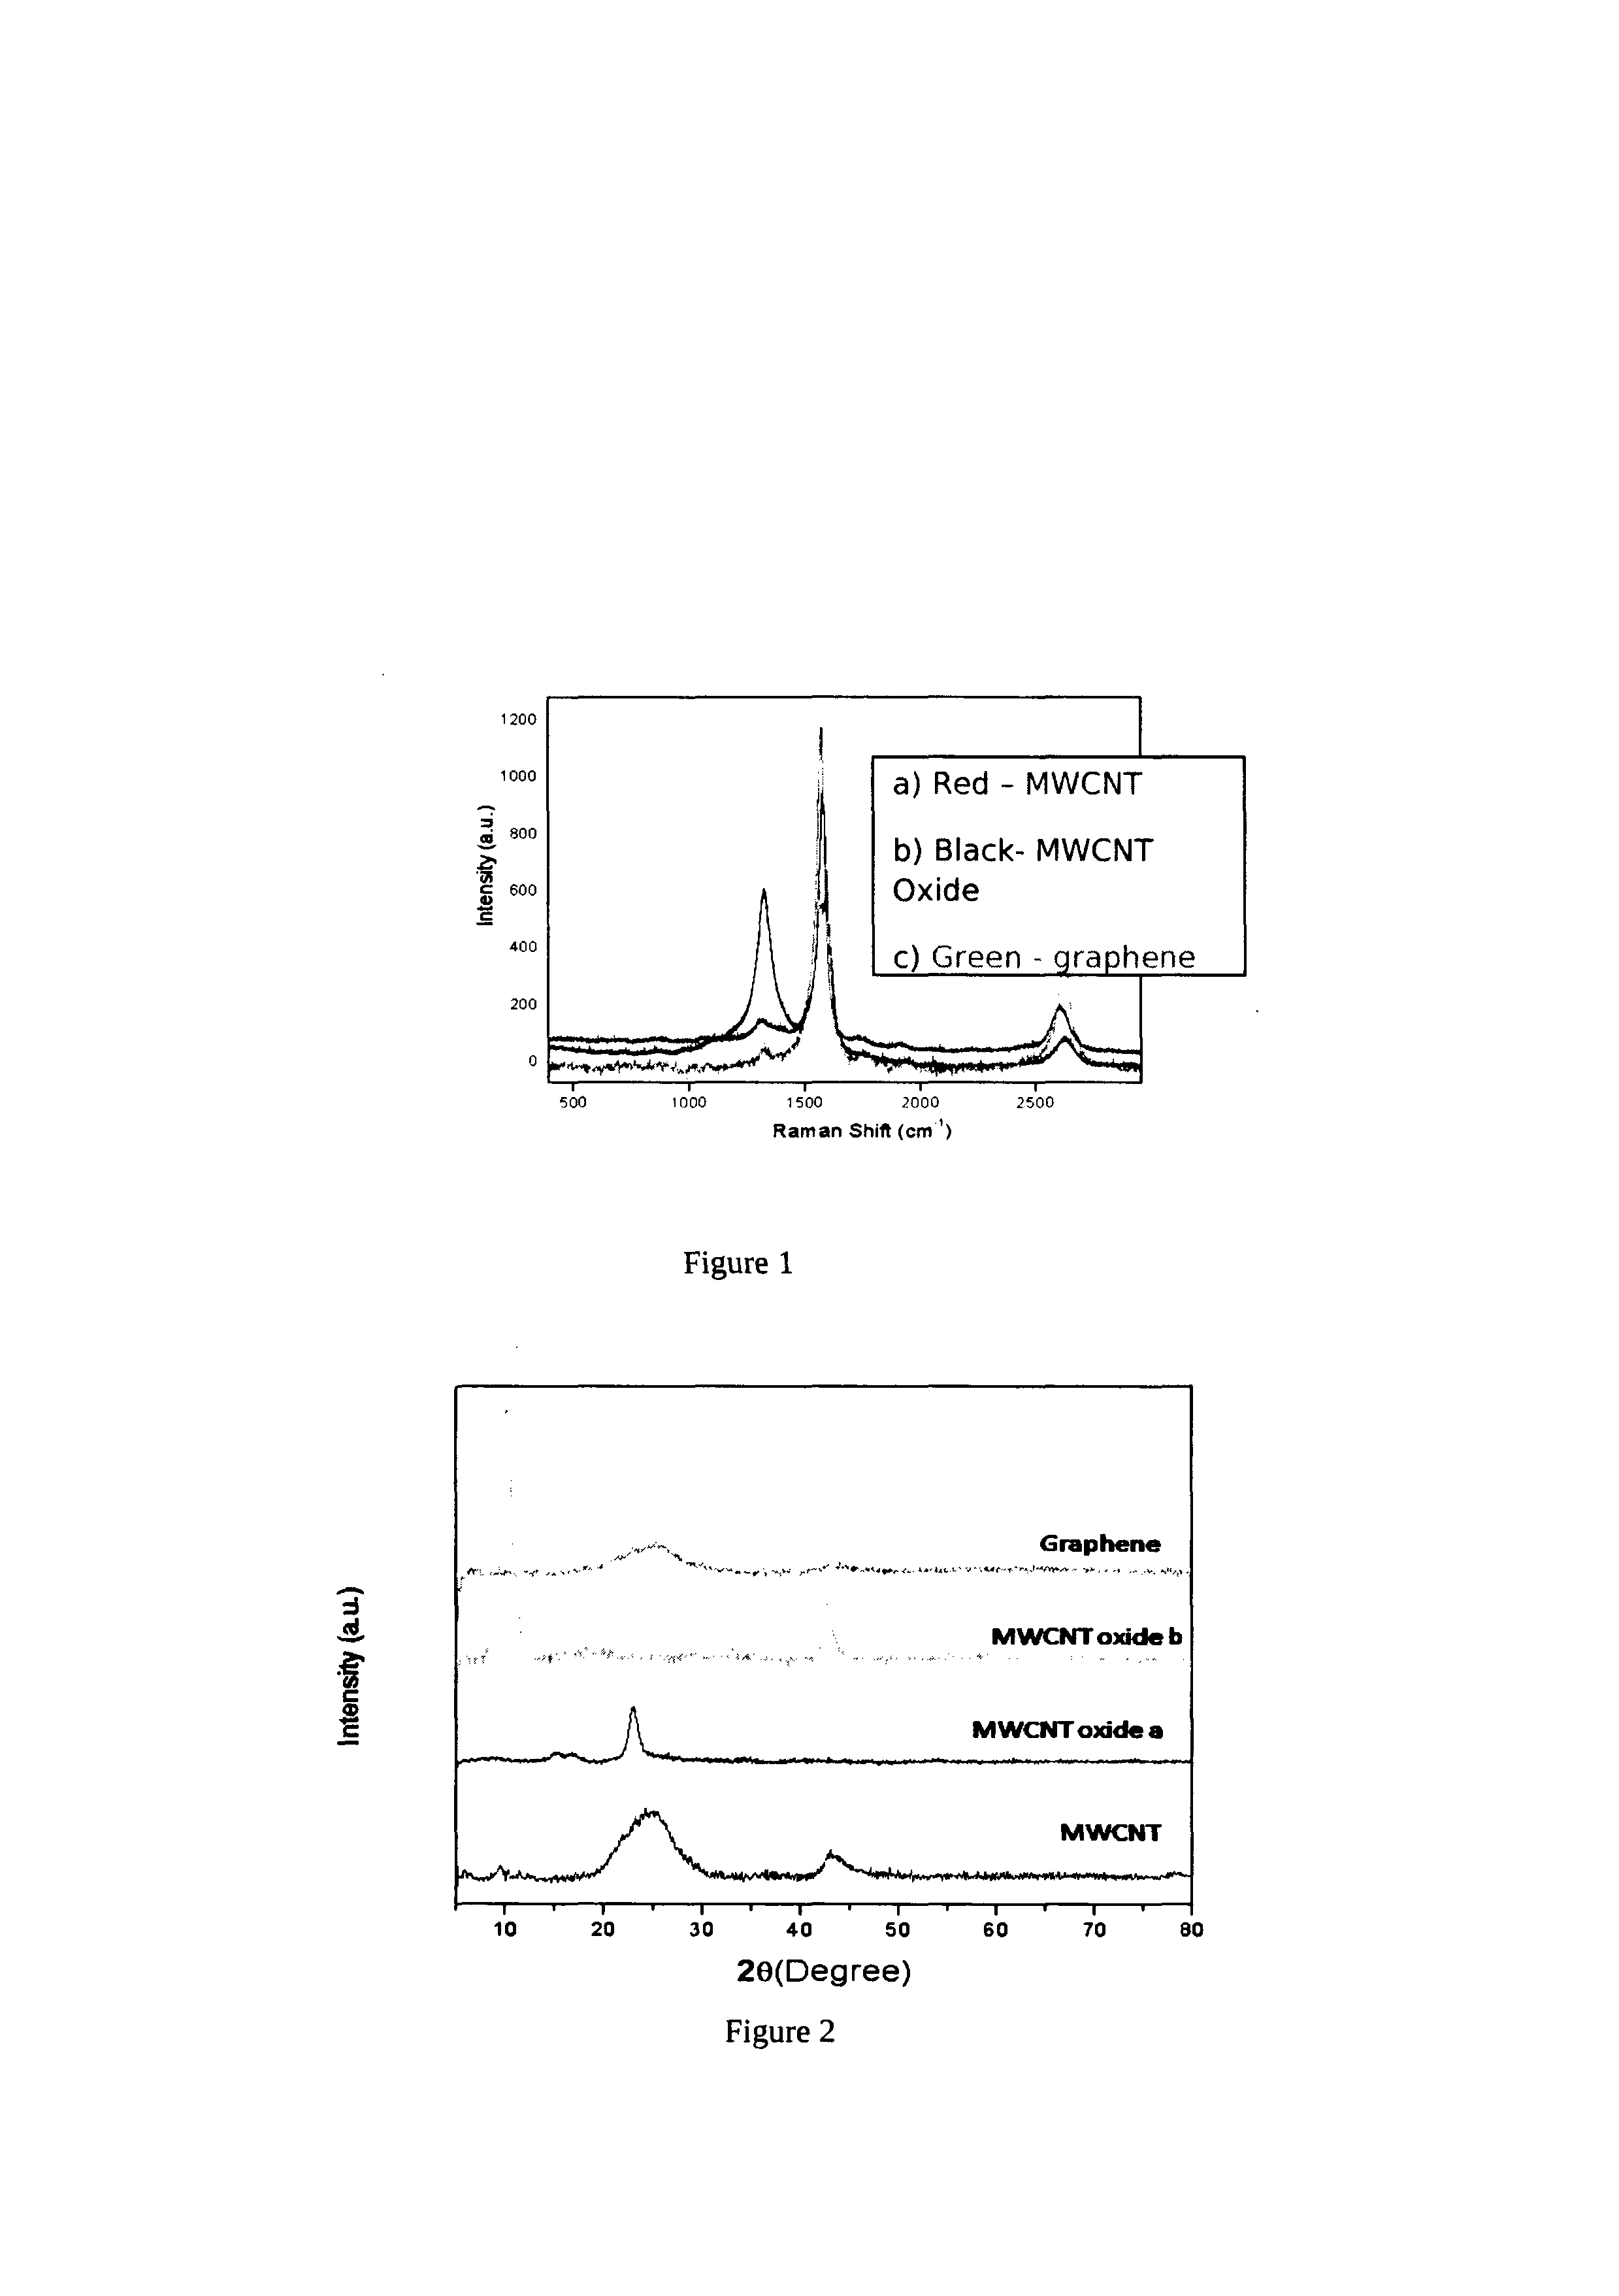 Electrochemical process for synthesis of graphene